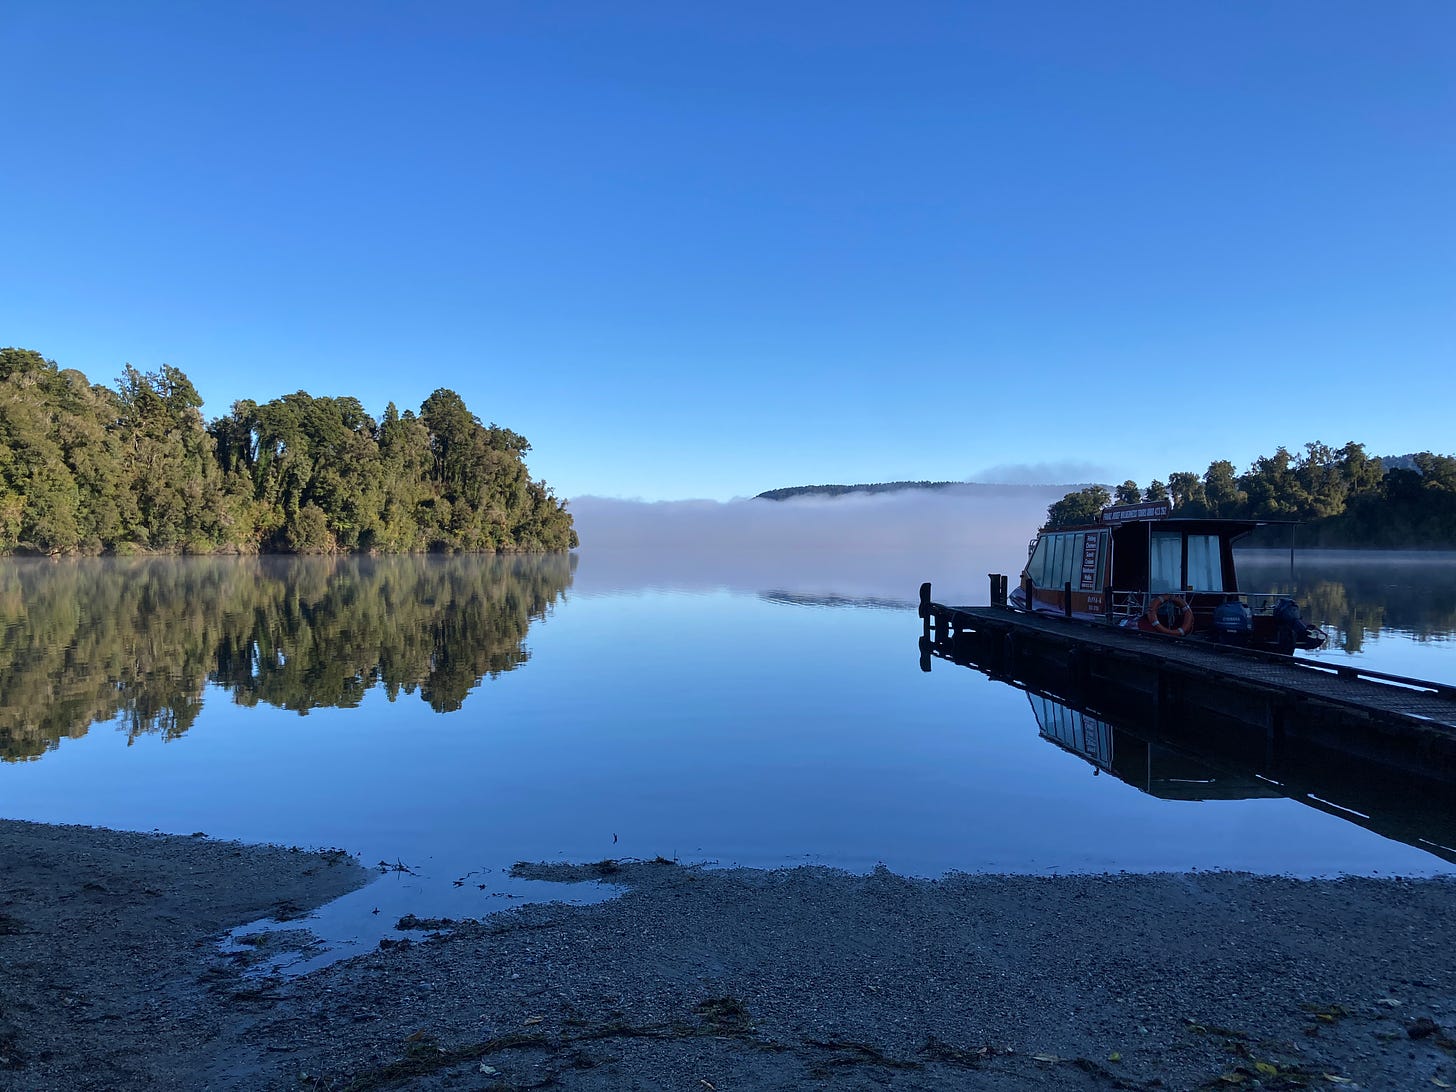 A picture of a lake in the morning, the landscape perfectly reflected in the water. On the right, a lone boat waits tied up a pier jutting out in to the water. In the near distance, mist blankets the view beyond.